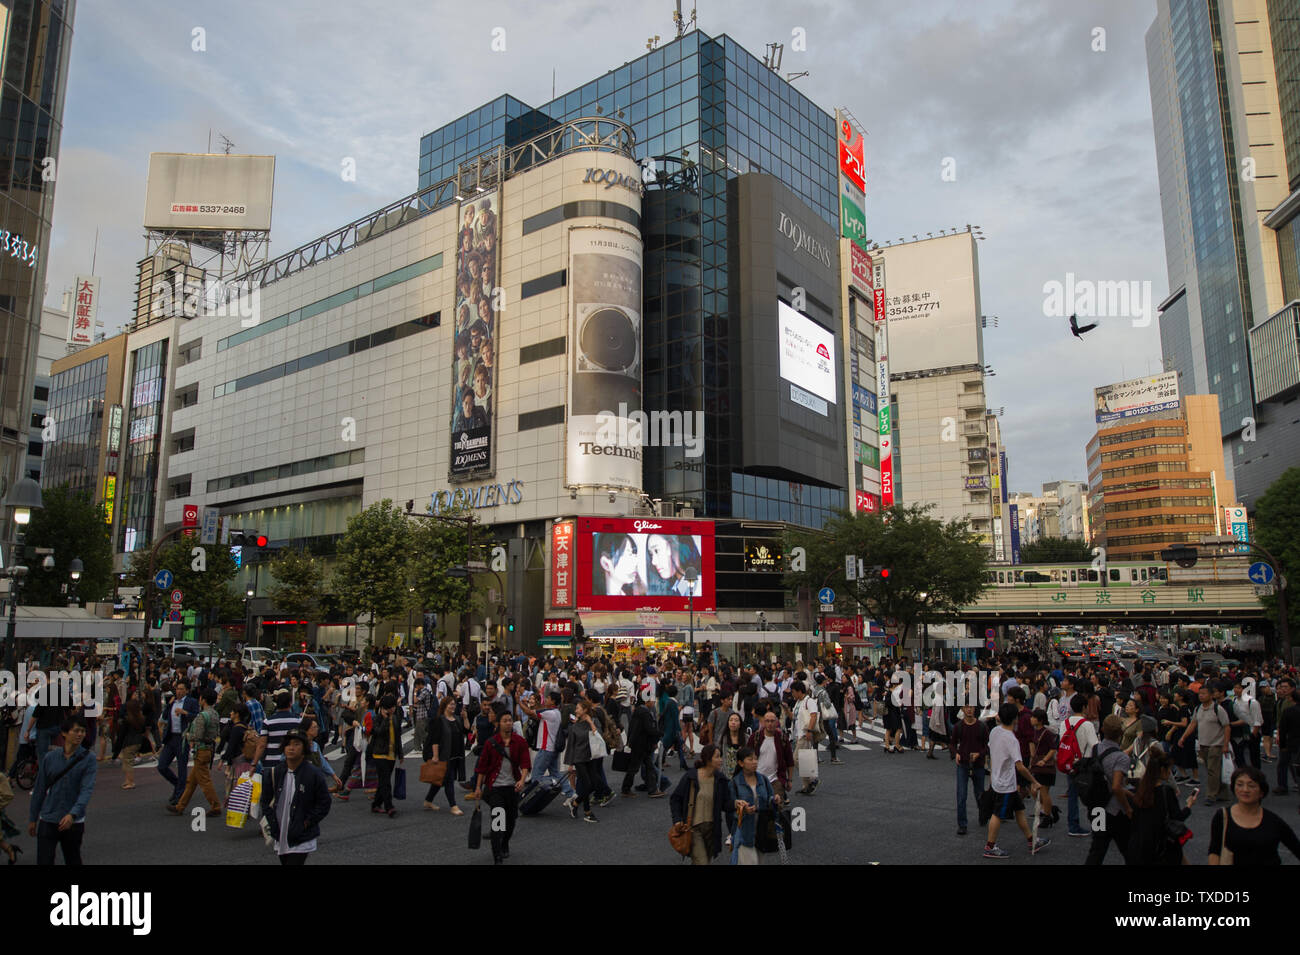 Shibuya Crossing in Tokyo, Japan, is famous for it's extremely busy scramble crosswalk, with pedestrians crossing in all directions at one time. Stock Photo